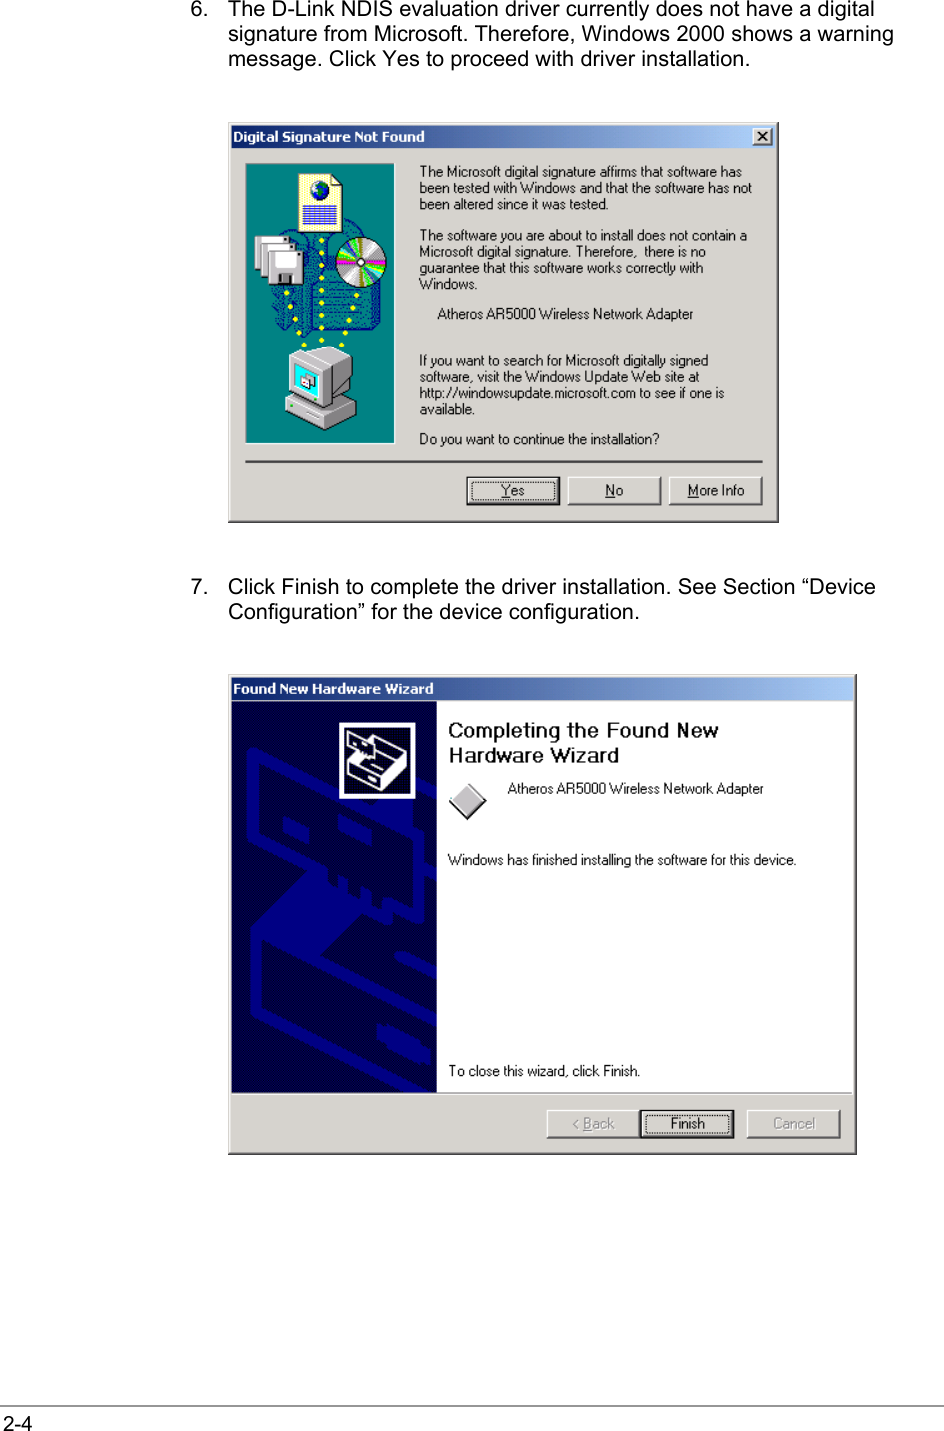  2-4 6.  The D-Link NDIS evaluation driver currently does not have a digital signature from Microsoft. Therefore, Windows 2000 shows a warning message. Click Yes to proceed with driver installation.    7.  Click Finish to complete the driver installation. See Section “Device Configuration” for the device configuration.    